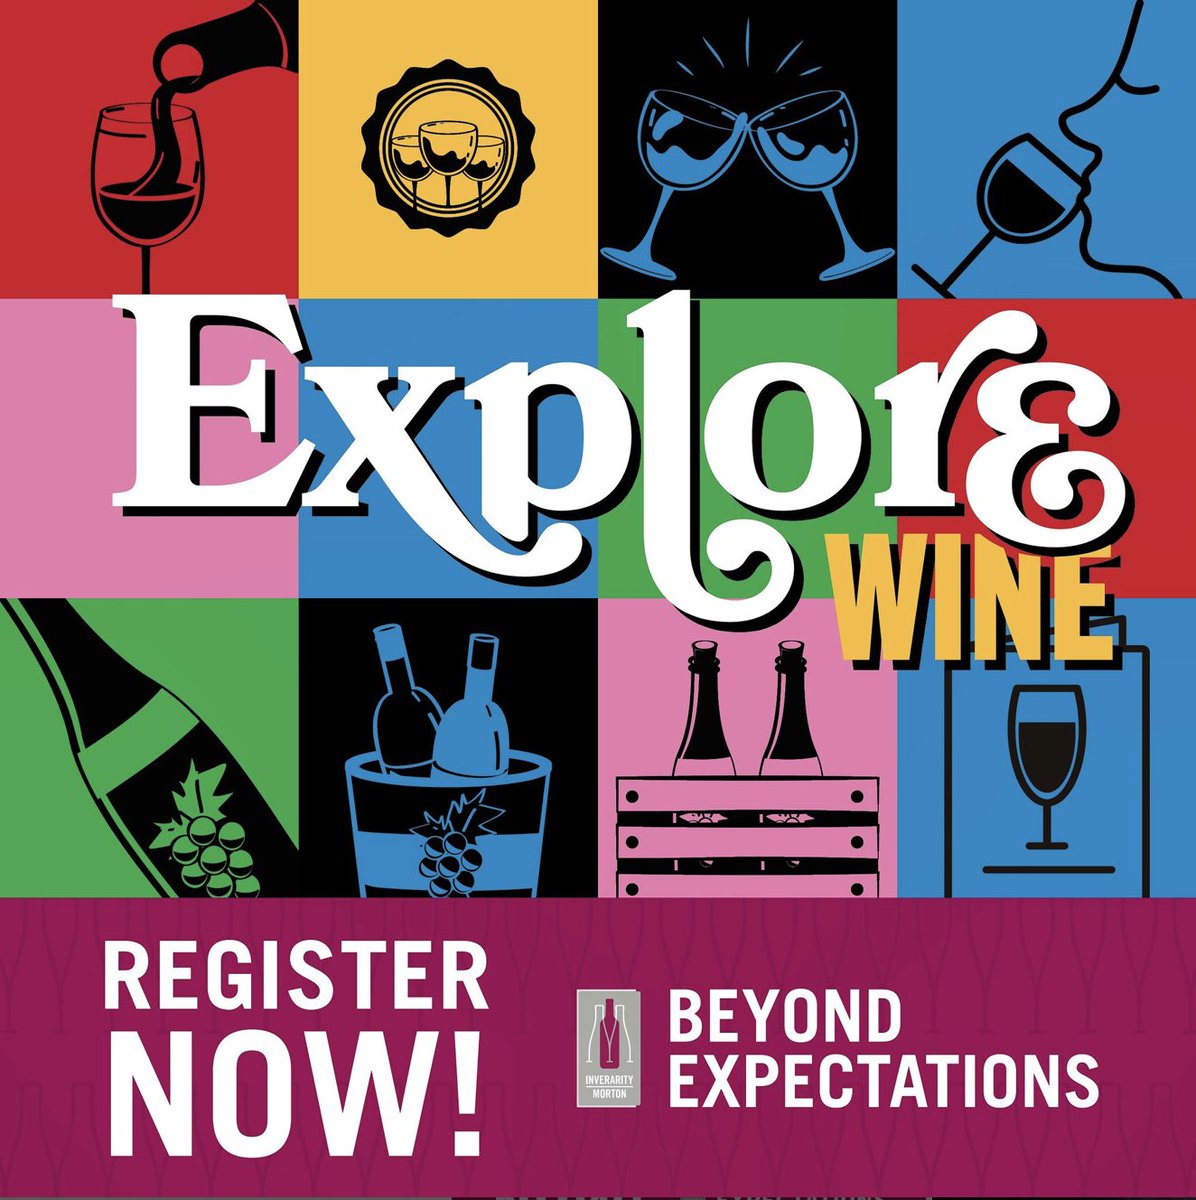 E X P L O R E 🌎#registernow
eventbrite.co.uk/e/explore-wine…
Join us on Tuesday, May 28th @ The Social Hub in #Glasgow EXPLORE will showcase the latest, most unique, and intriguing #wines in our IM portfolio.
Register now to uncover the extraordinary and unconventional..🍷#winevent